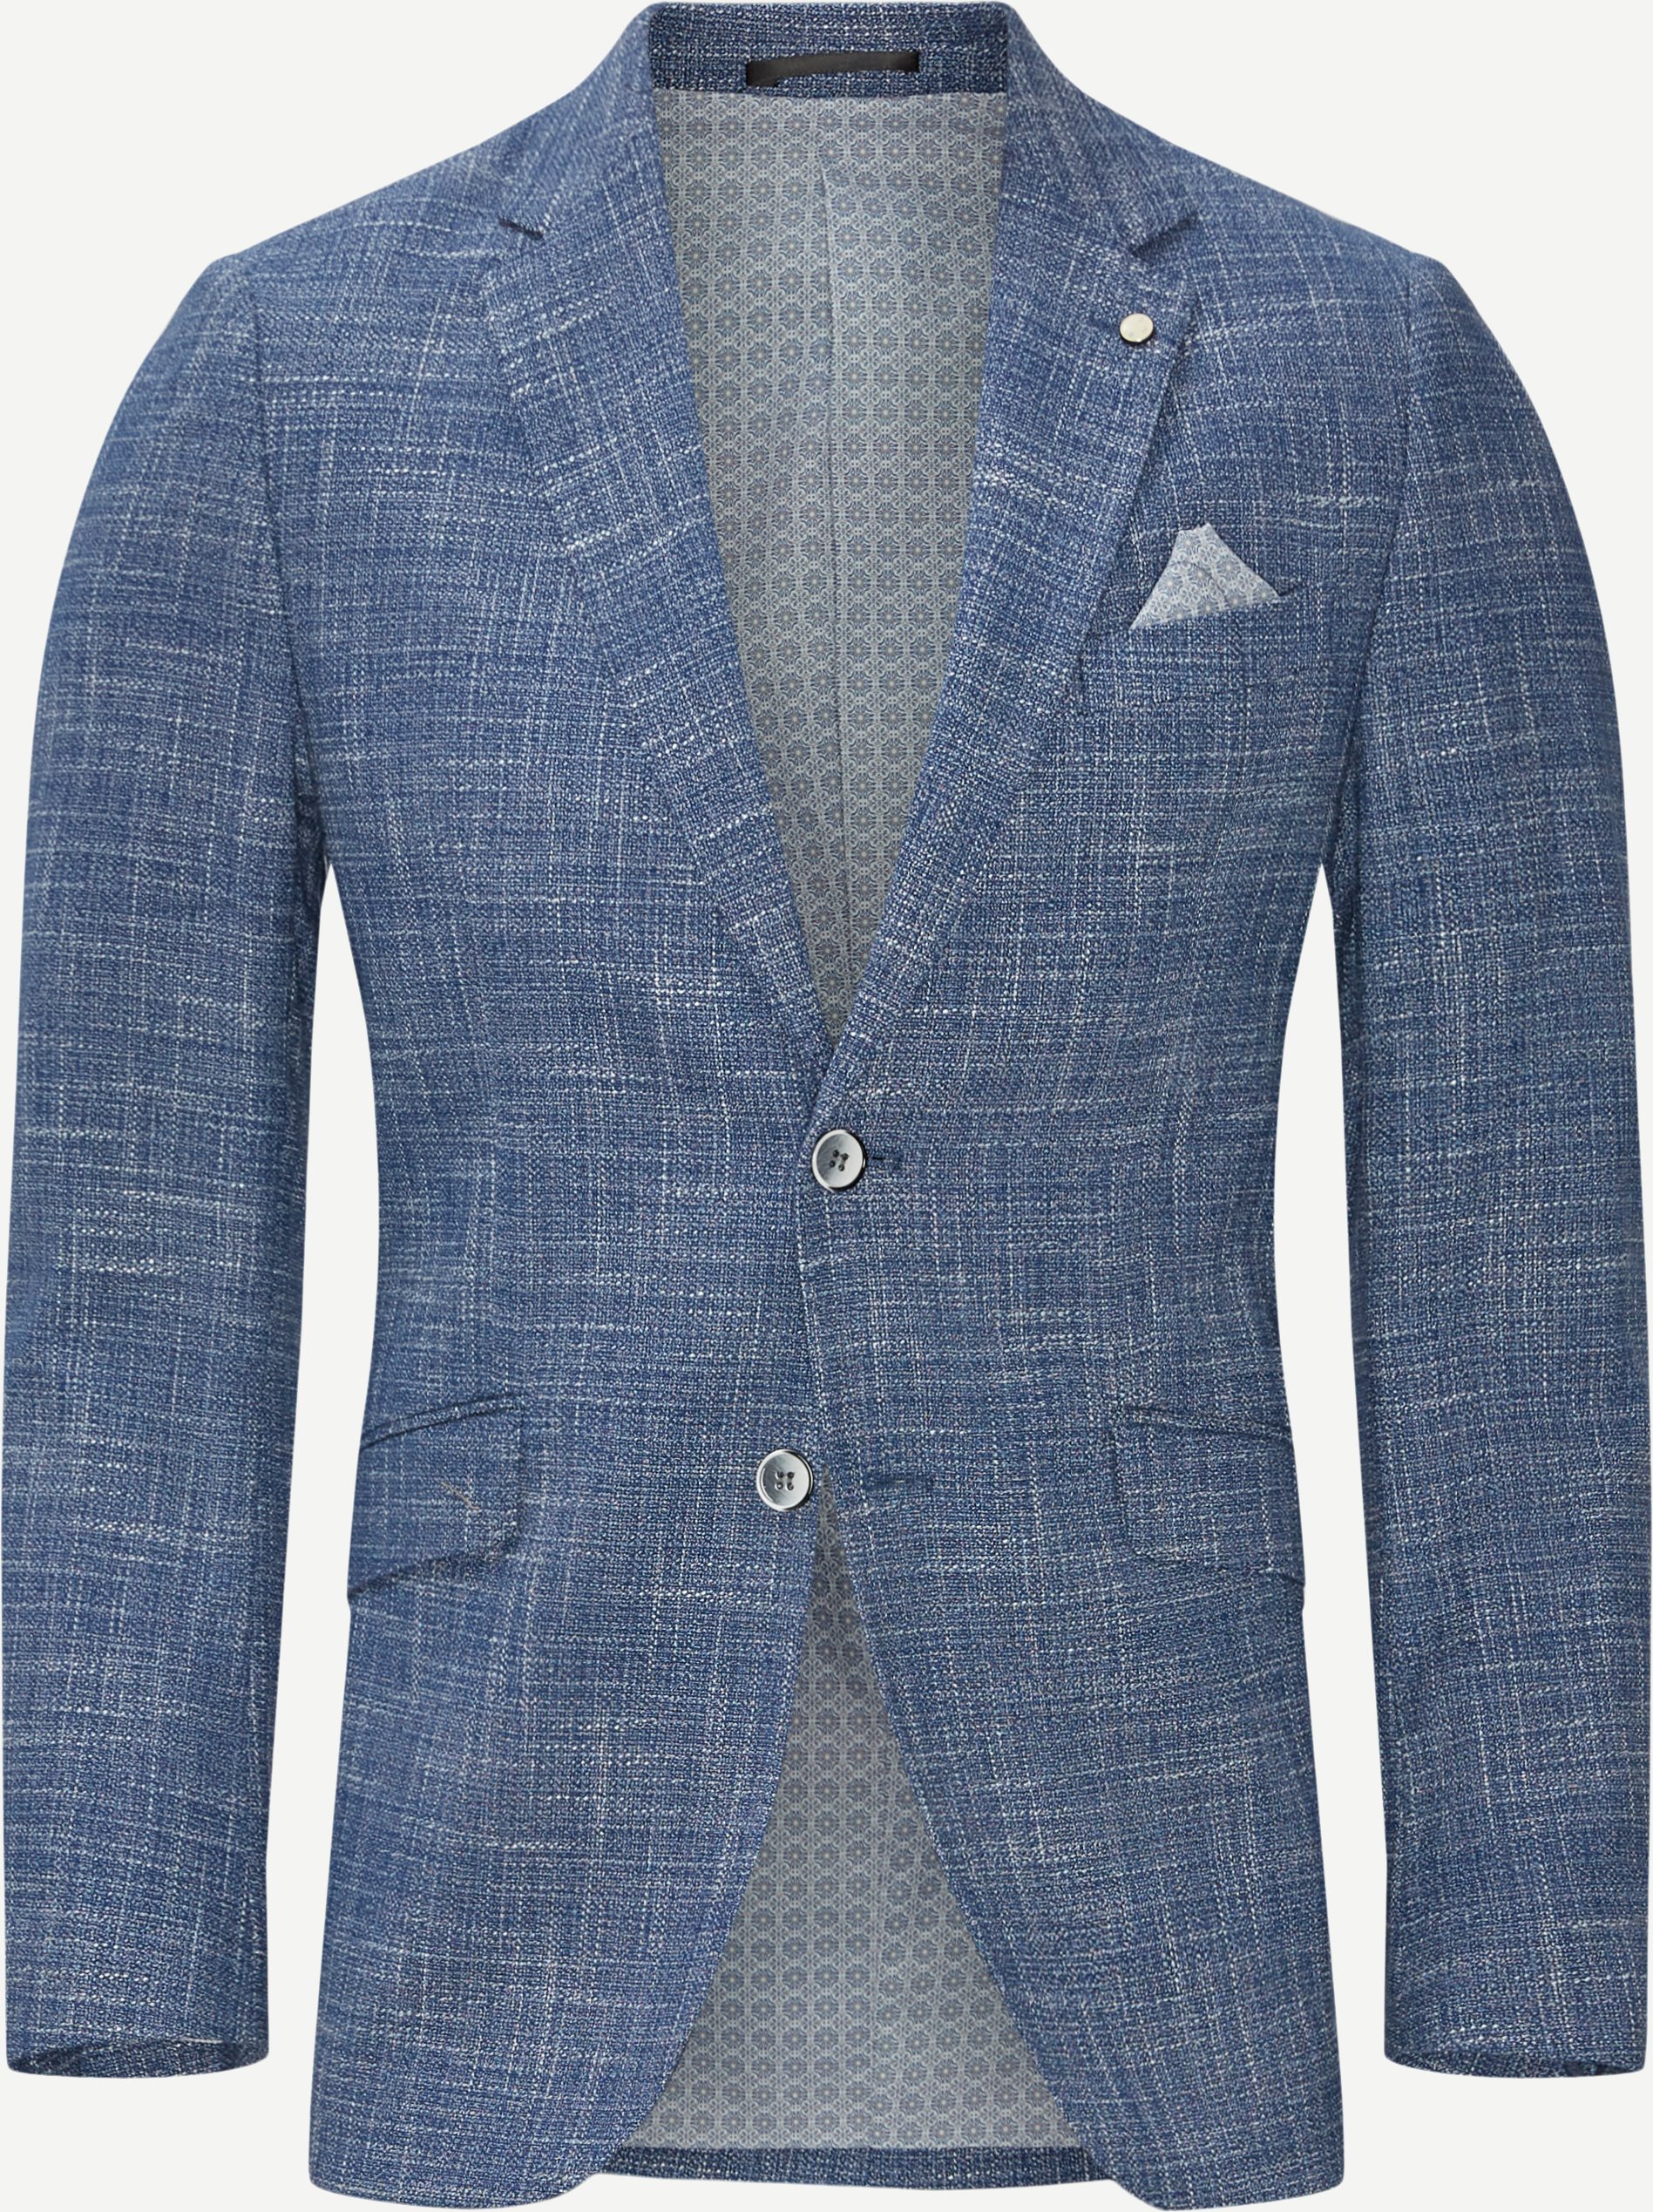 Blazers - Fitted body fit - Blue